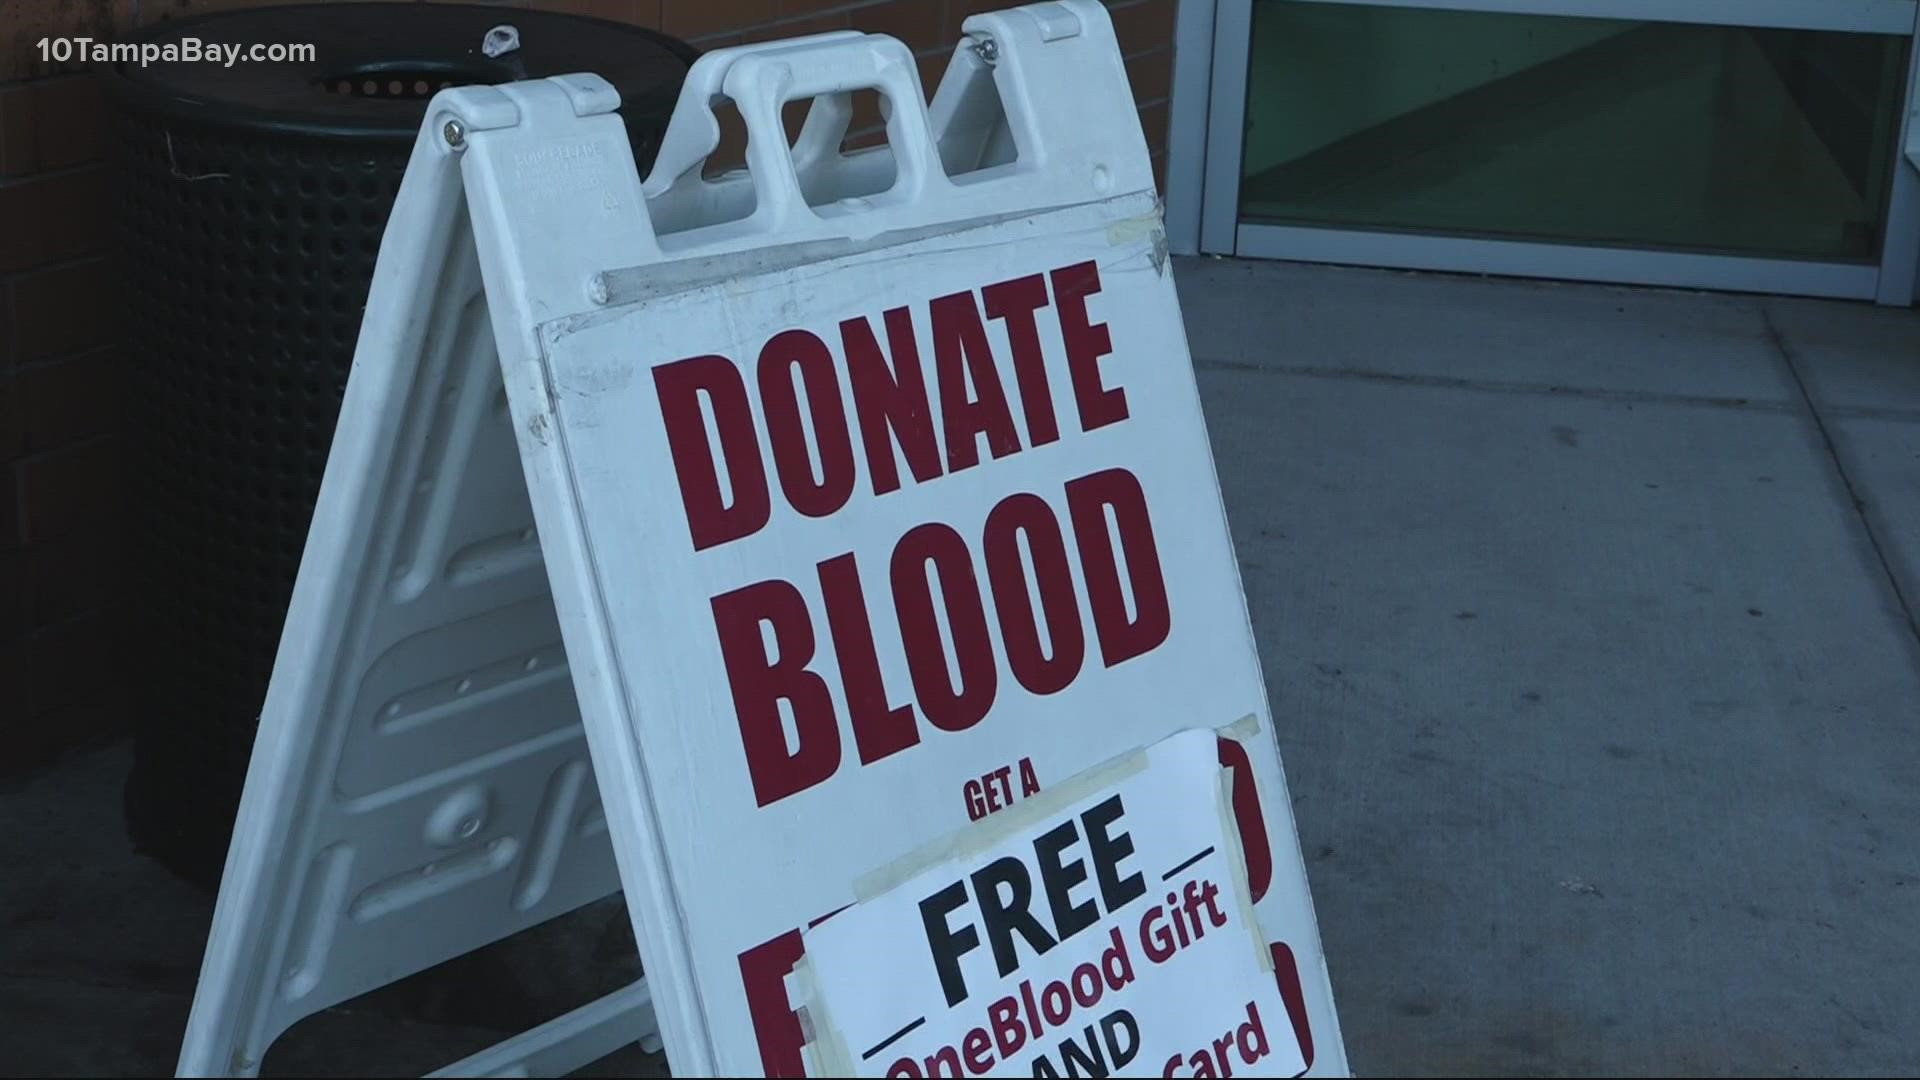 There is no substitute or synthetic replacement for blood, so donations are needed.